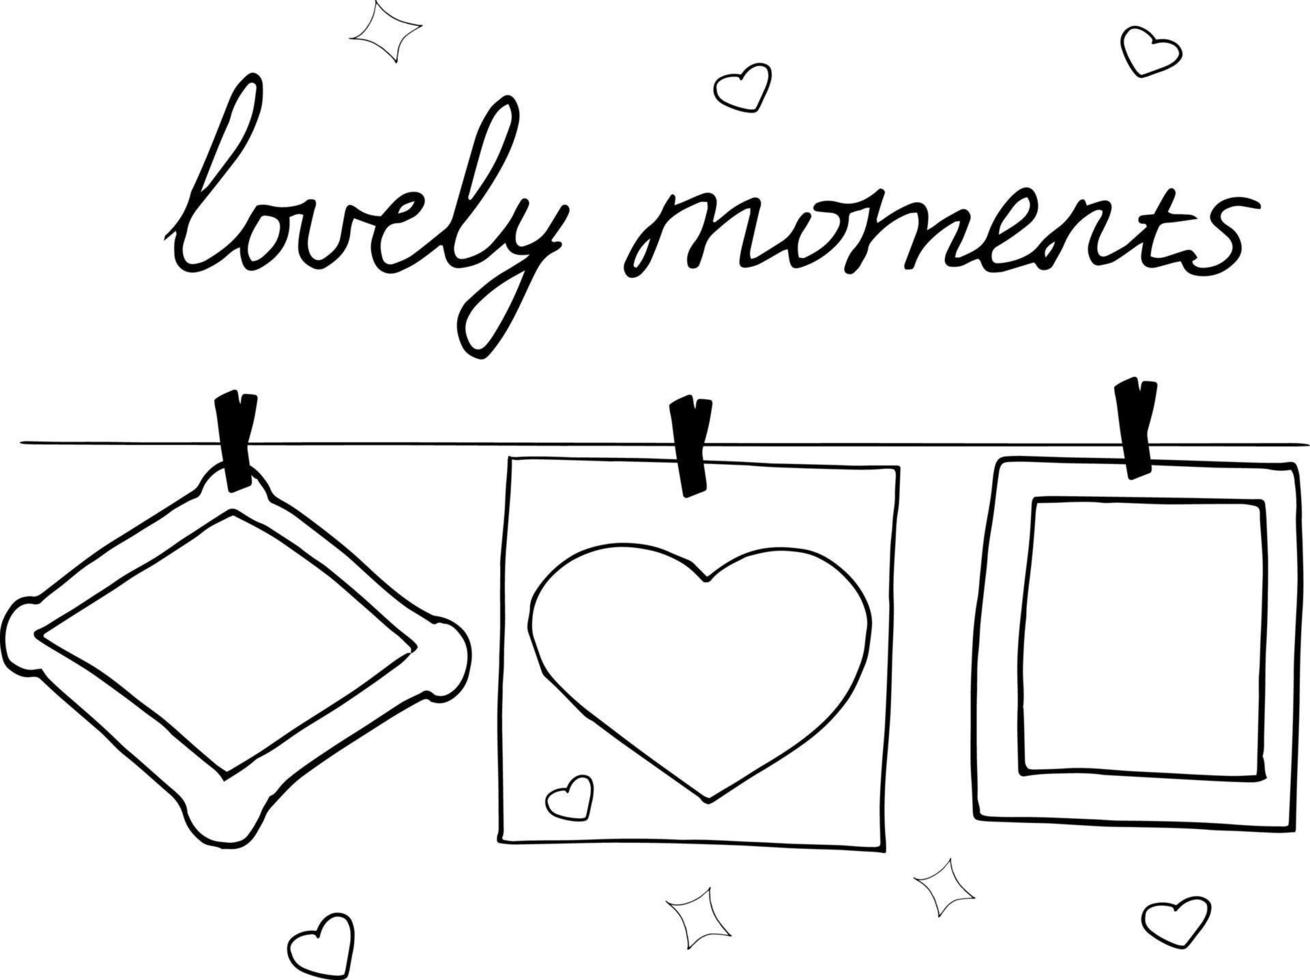 frames and heart hang on clothespins on a thread and lettering lovely moments sketch hand drawn doodle. template decor, , monochrome, love, valentine day vector